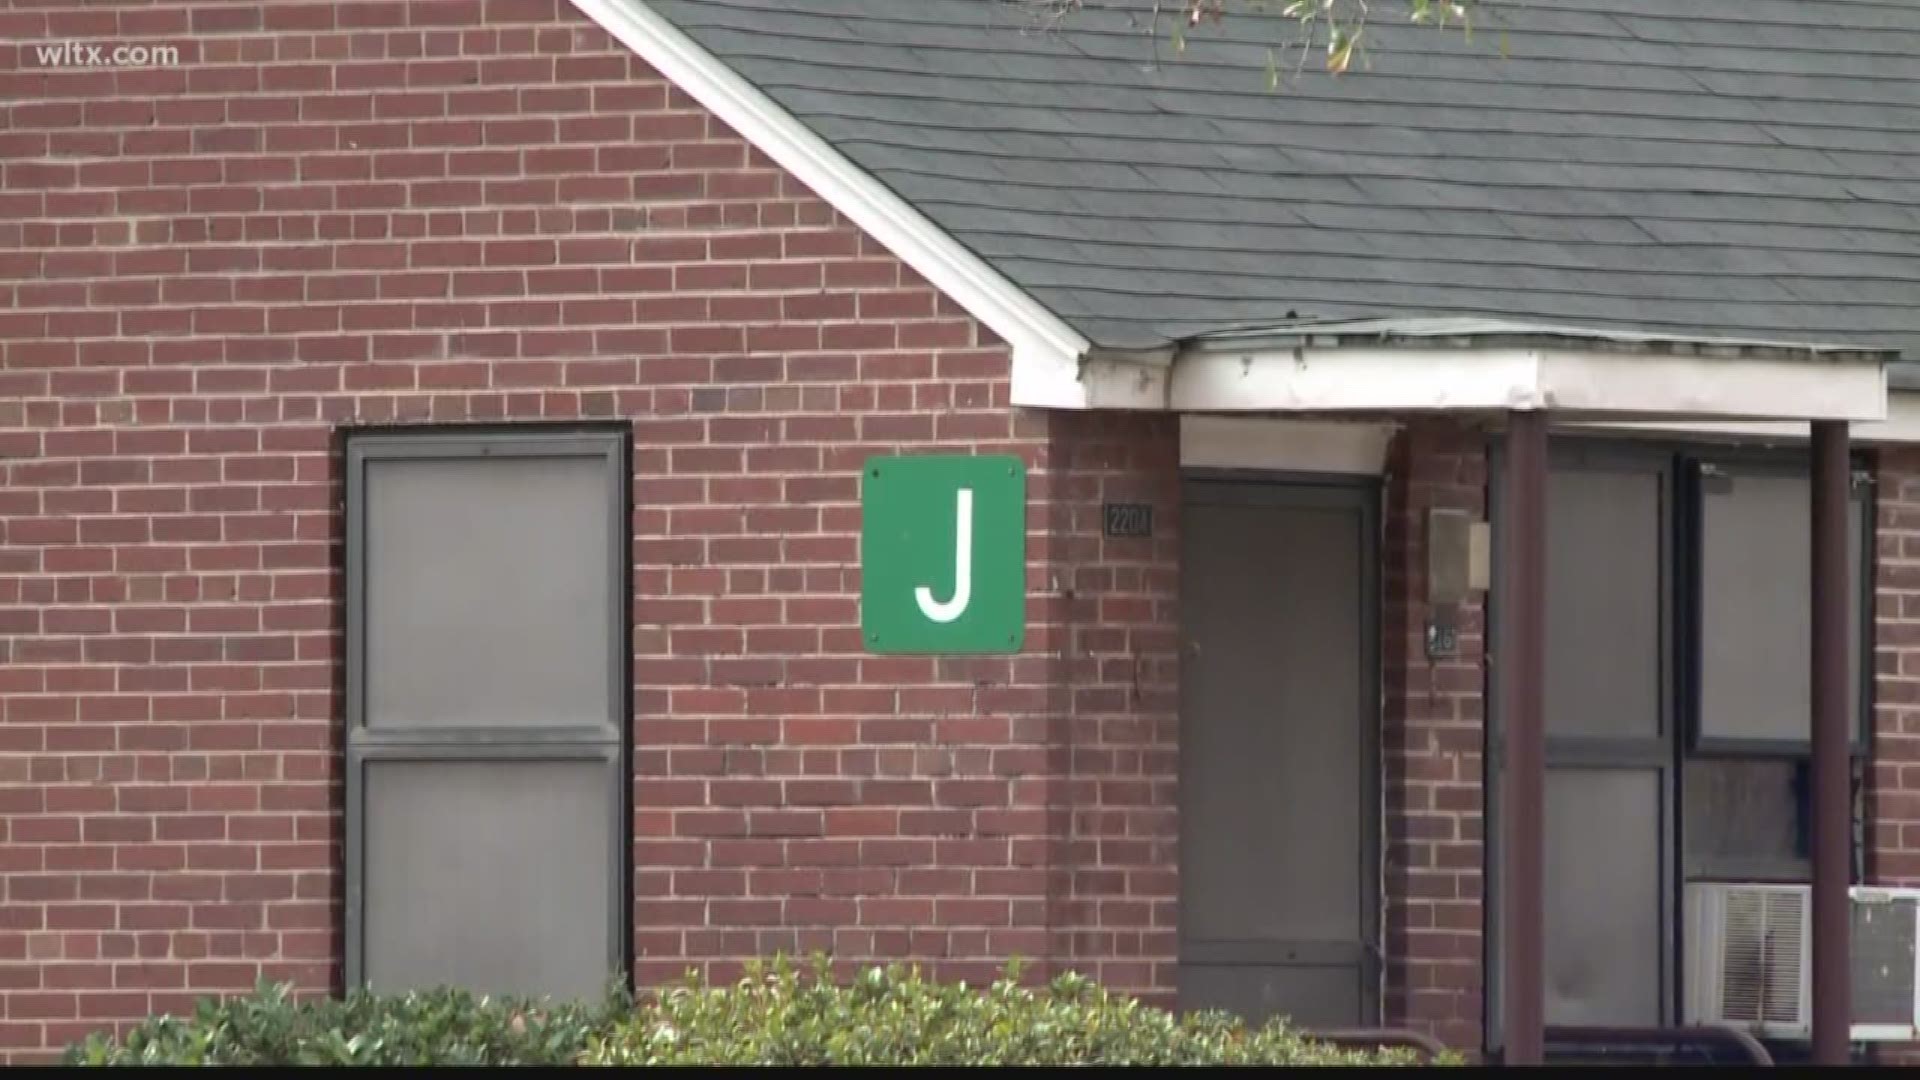 Unit J1 is where Columbia Police found resident Derrick Roper dead